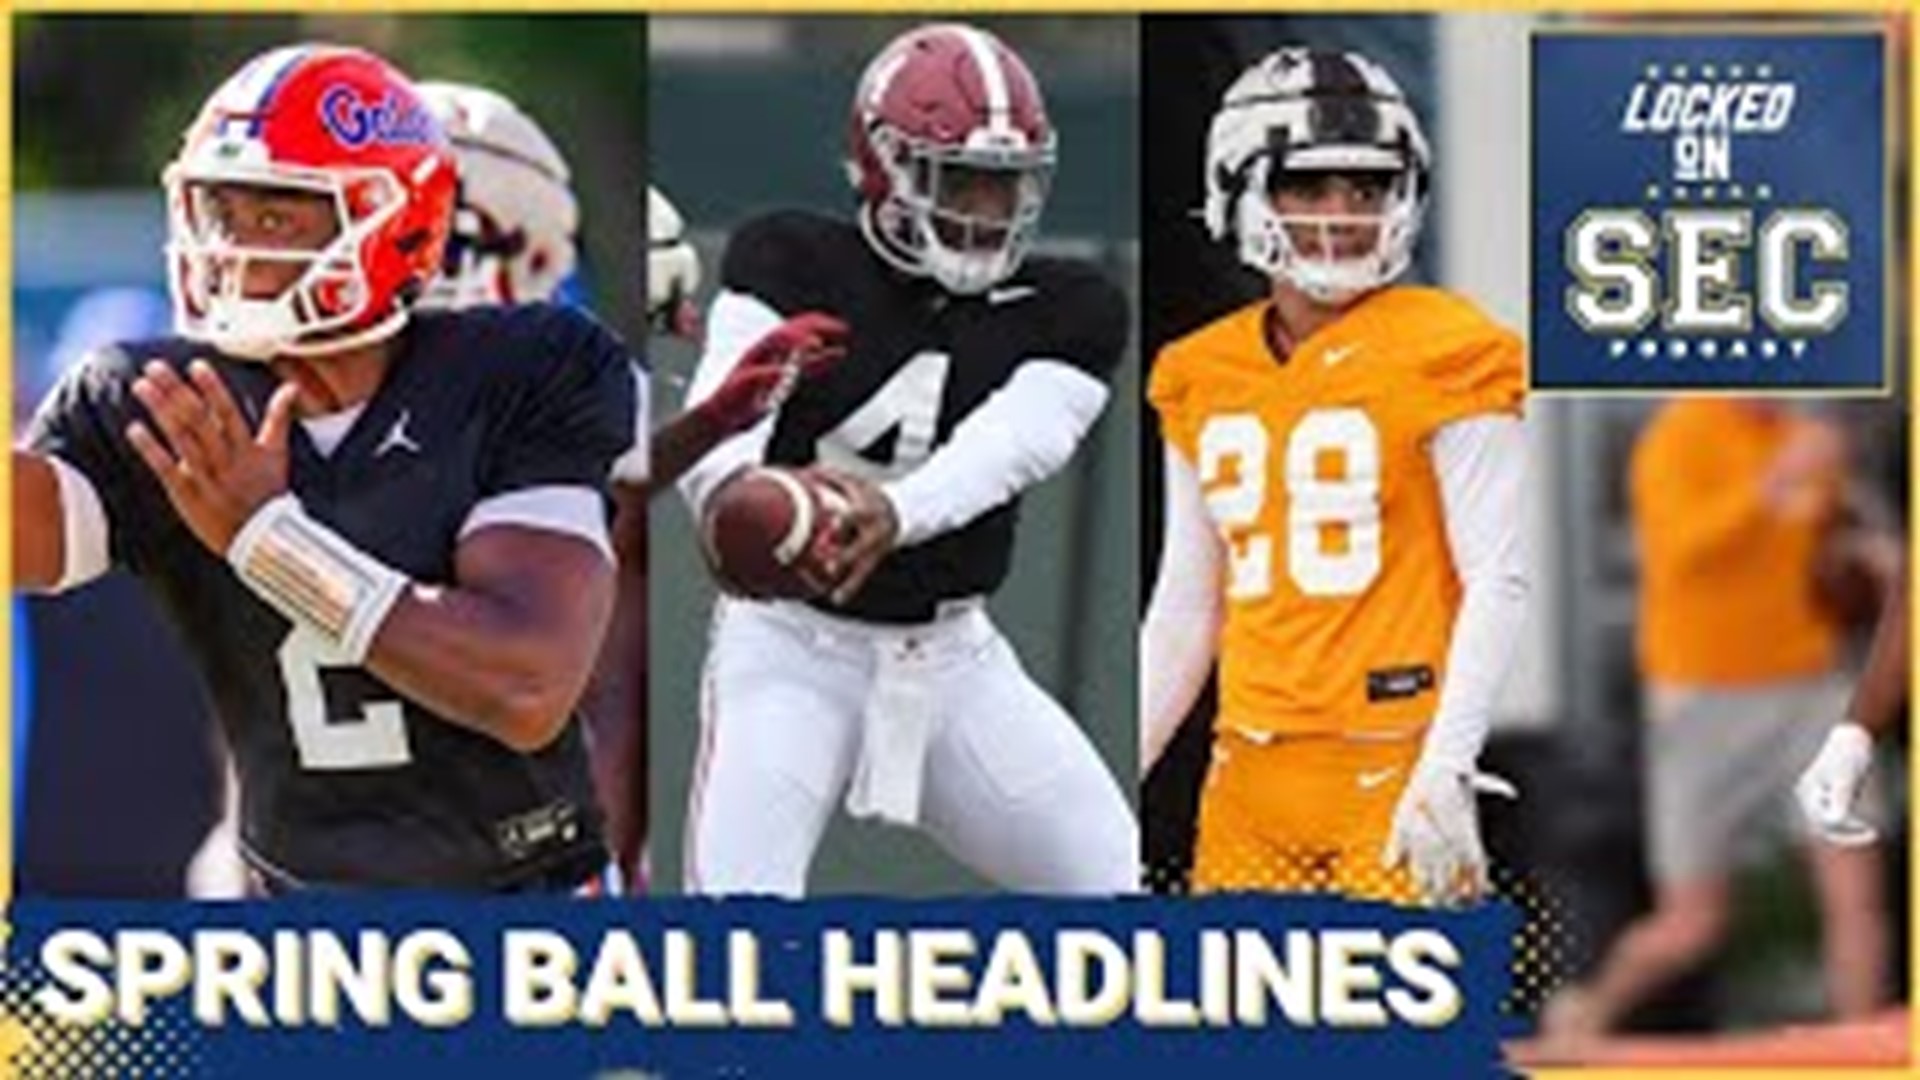 On today's show, we hit on some of the Spring Practice highlights from the past few days, including a few teams who held spring scrimmages over the weekend.